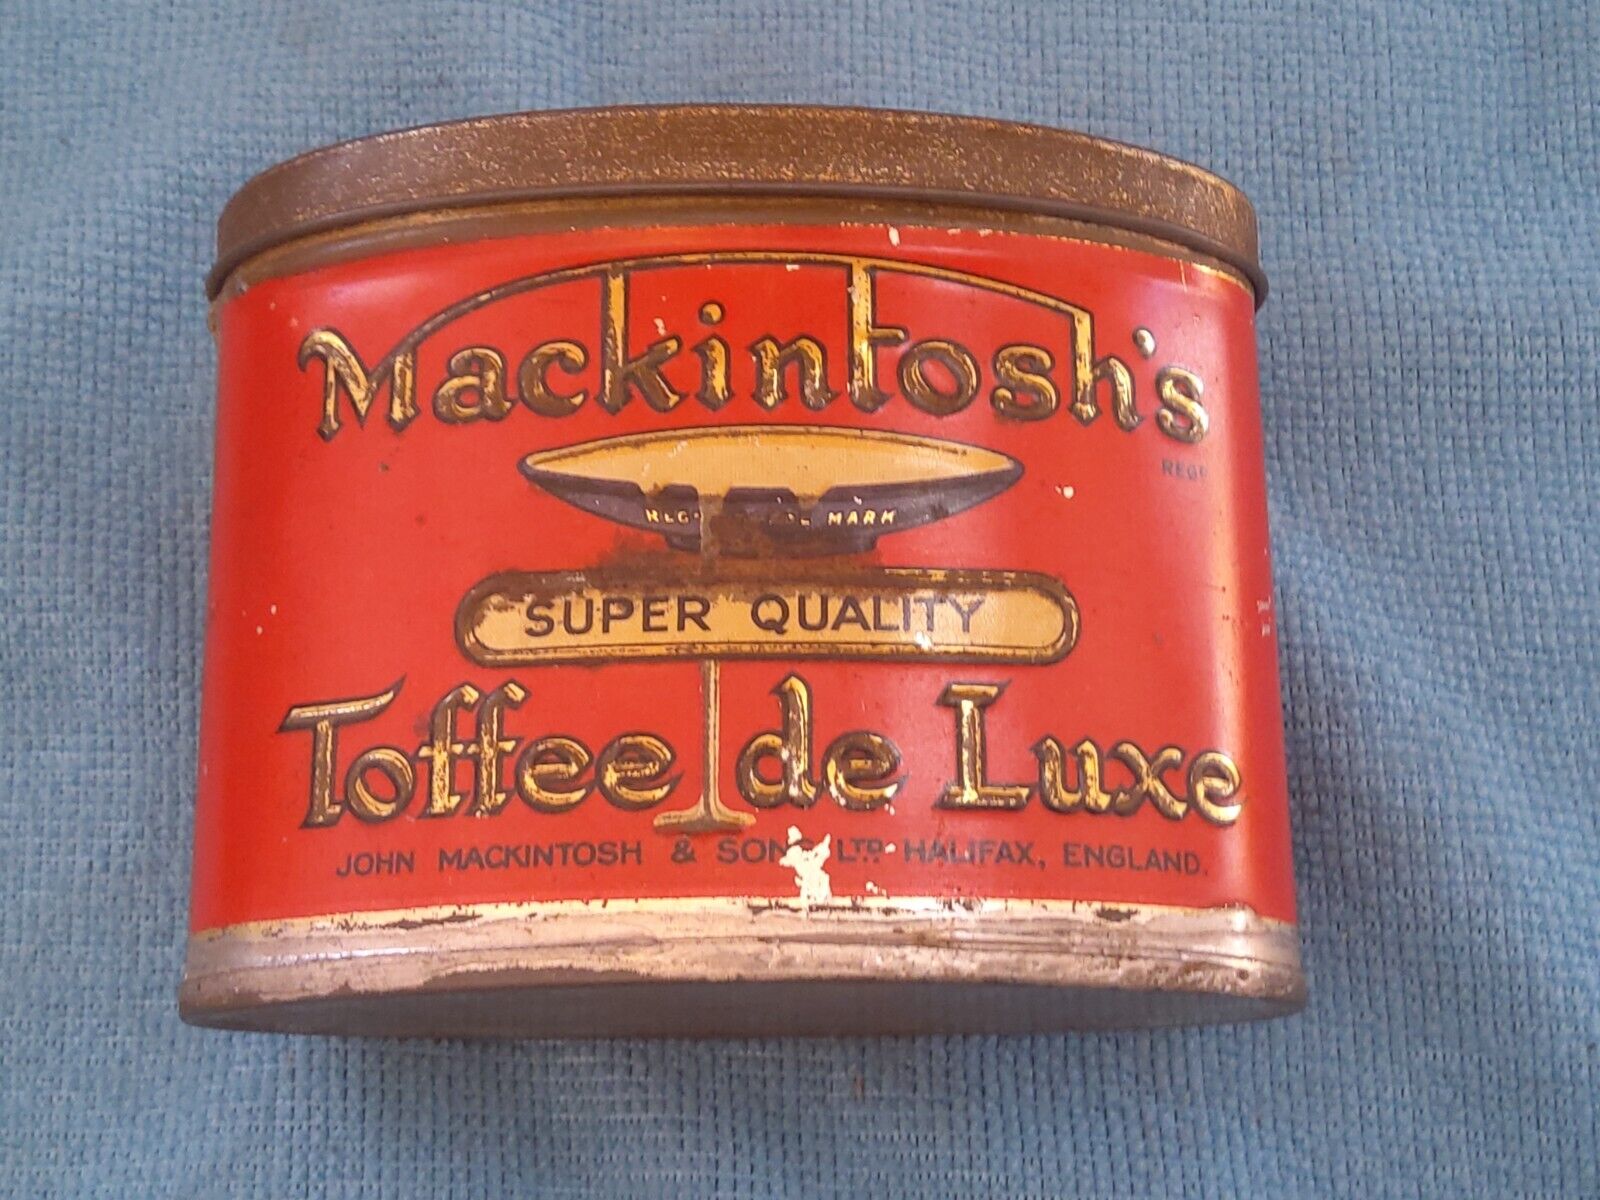 VINTAGE MACKINTOSH'S TOFFEE DE LUXE CANDY TIN RED OVAL HALIFAX ENGLAND